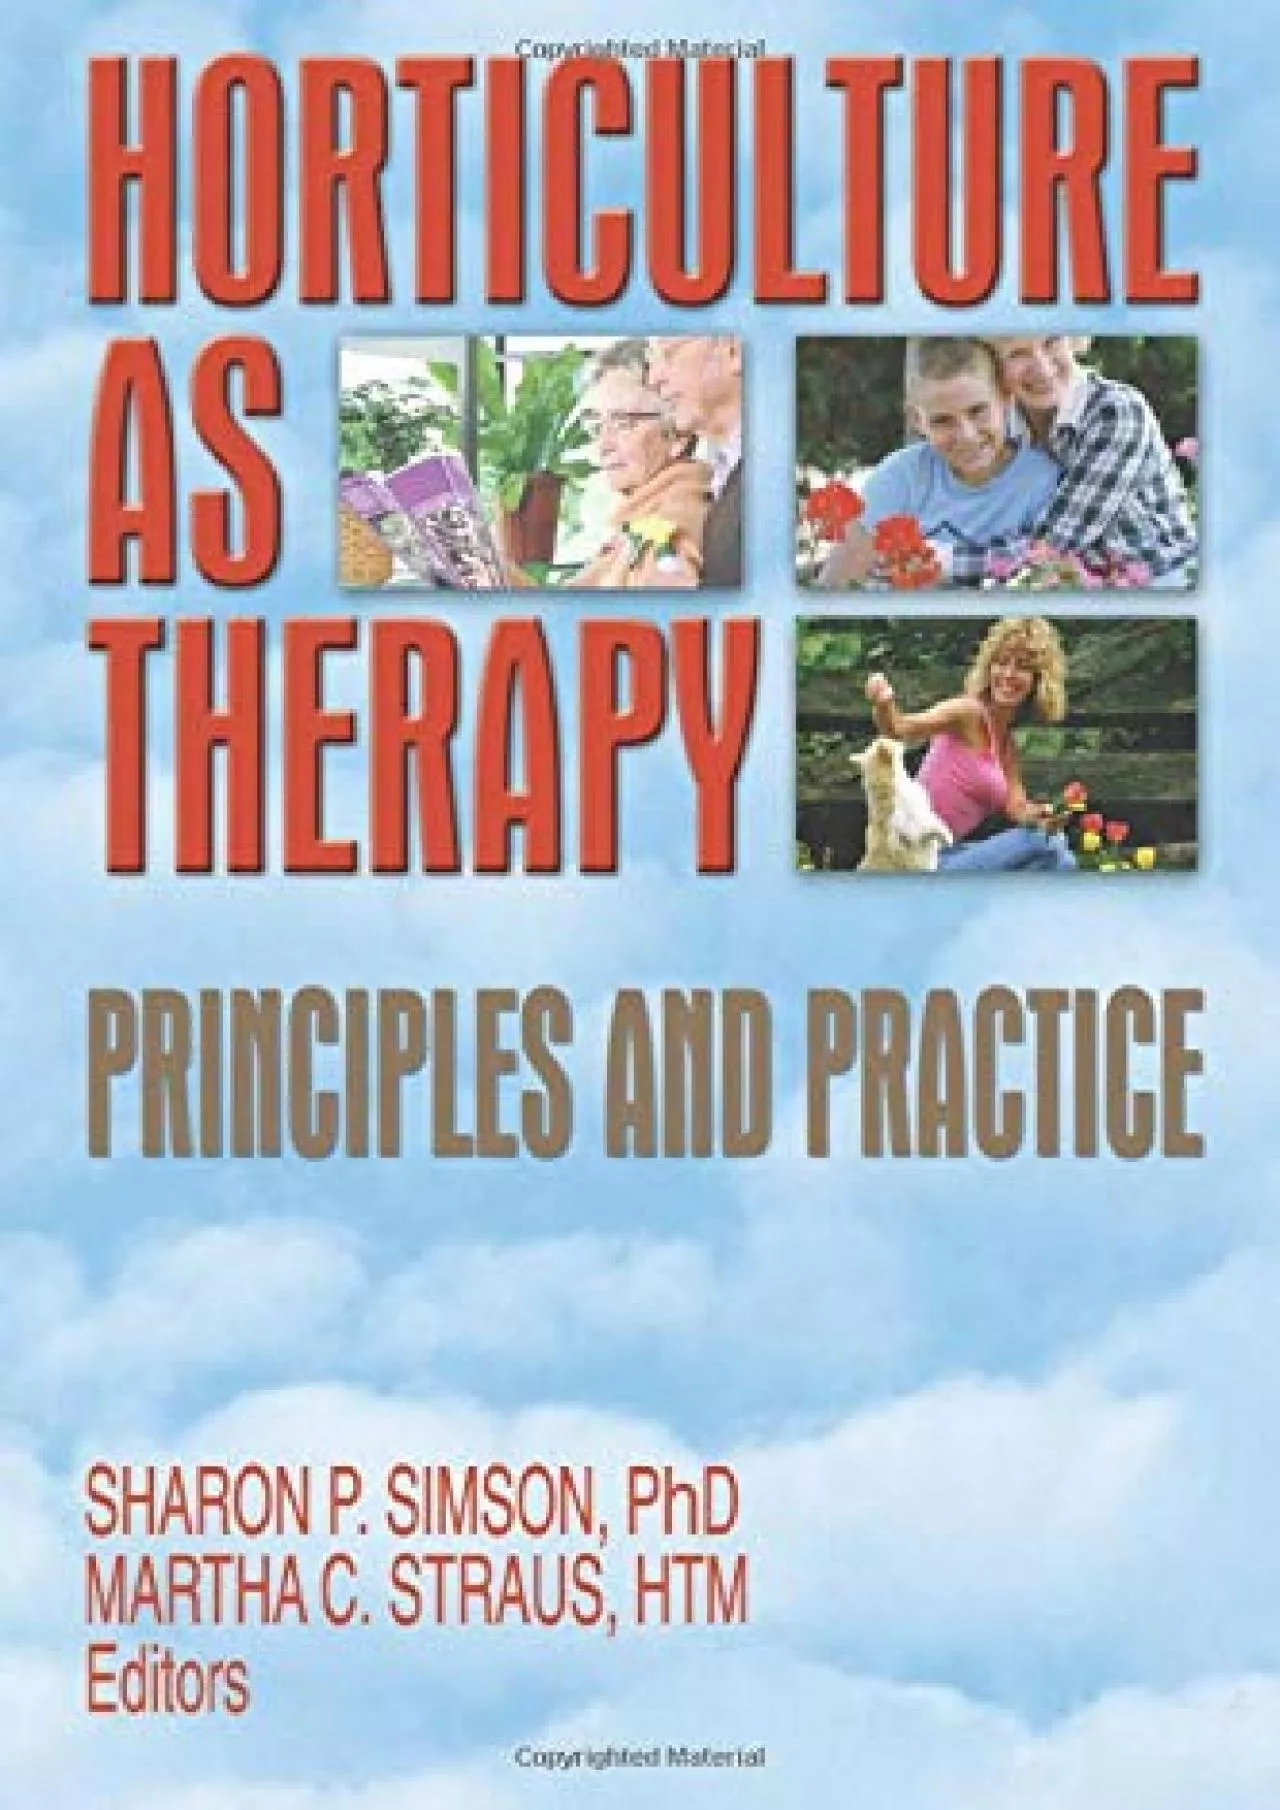 (DOWNLOAD)-Horticulture as Therapy: Principles and Practice